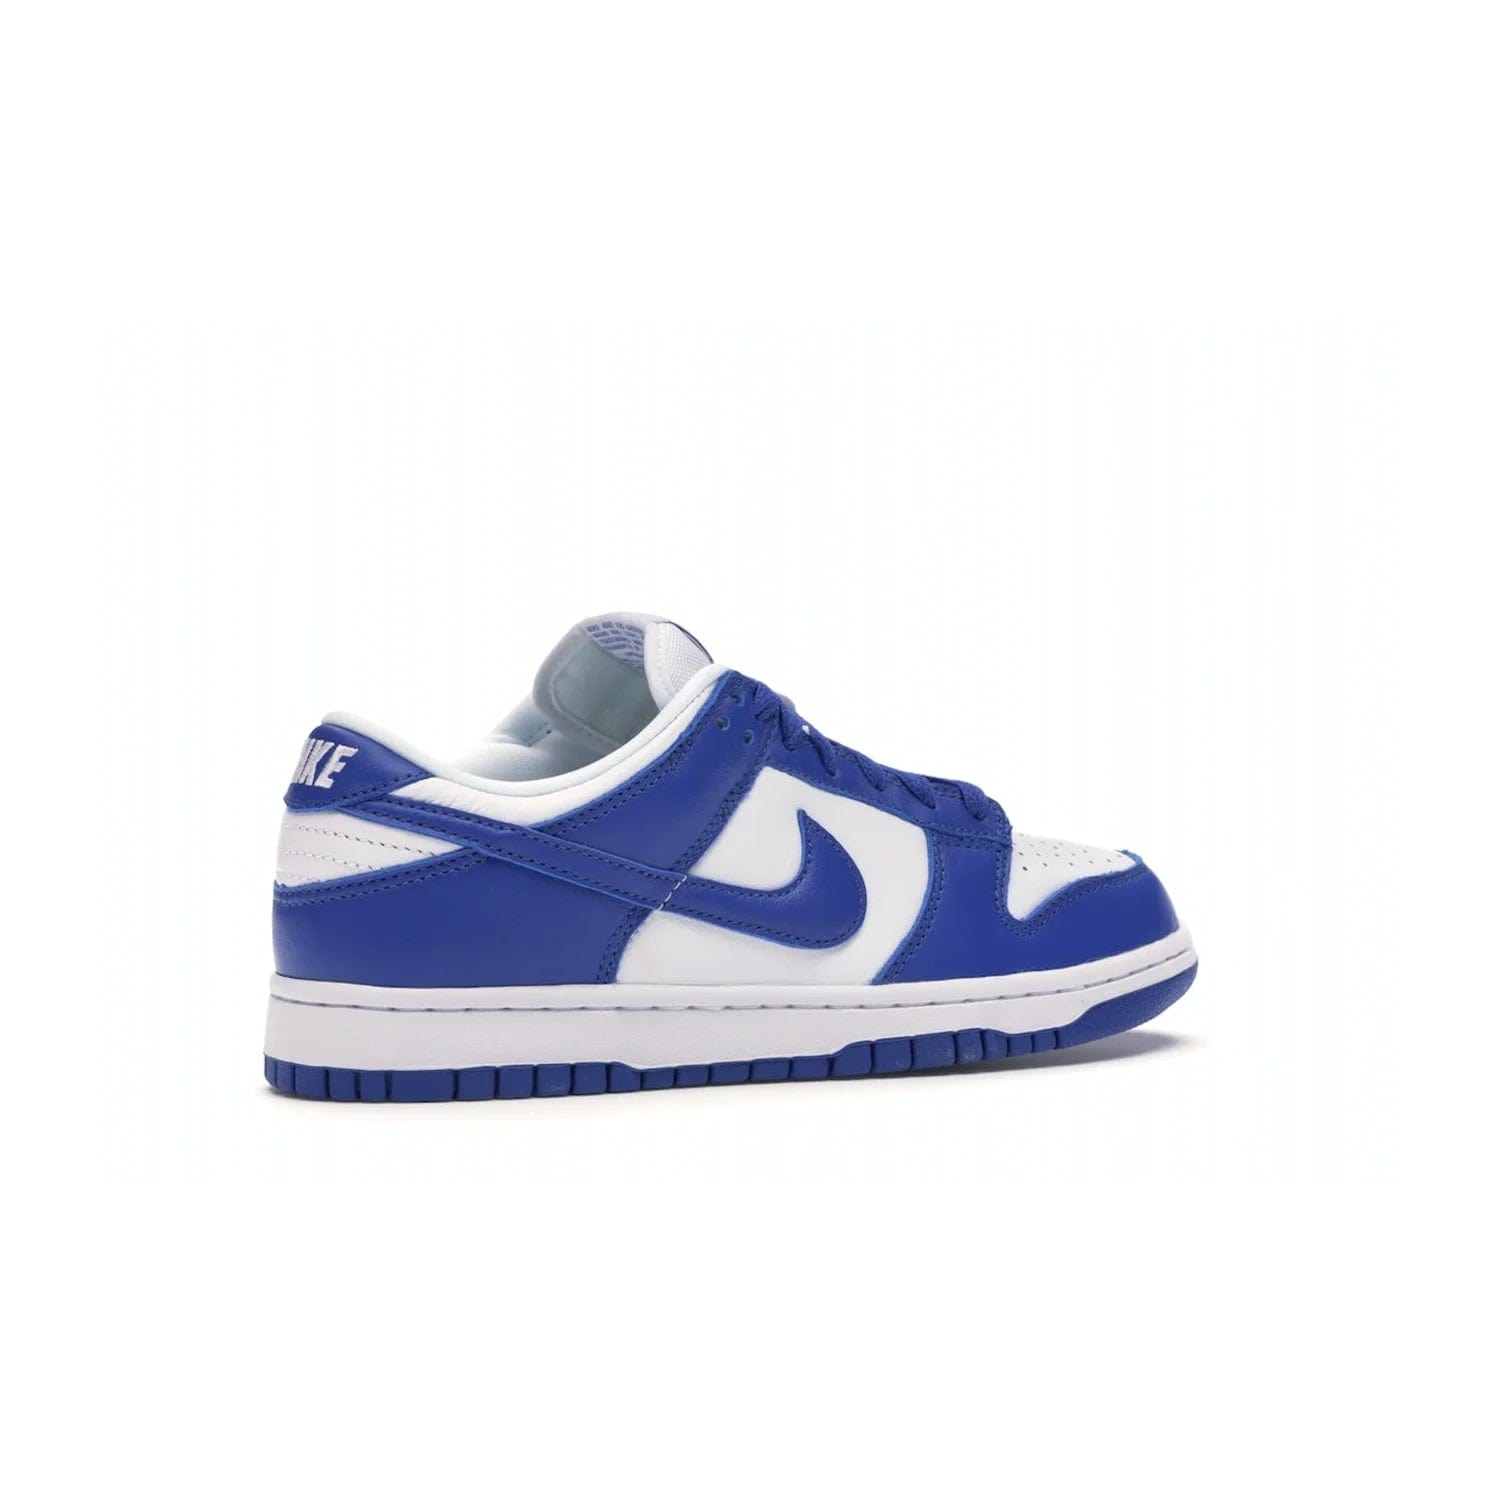 Nike Dunk Low SP Kentucky (2020/2022) - Image 34 - Only at www.BallersClubKickz.com - Classic Nike Dunk Low SP Kentucky with timeless White/Varsity Royal colorway. White leather upper, royal outsole, and Nike branding. A hit since March 2020 homage to the 1985 Nike College Colors program. Show your support with these classic kicks.